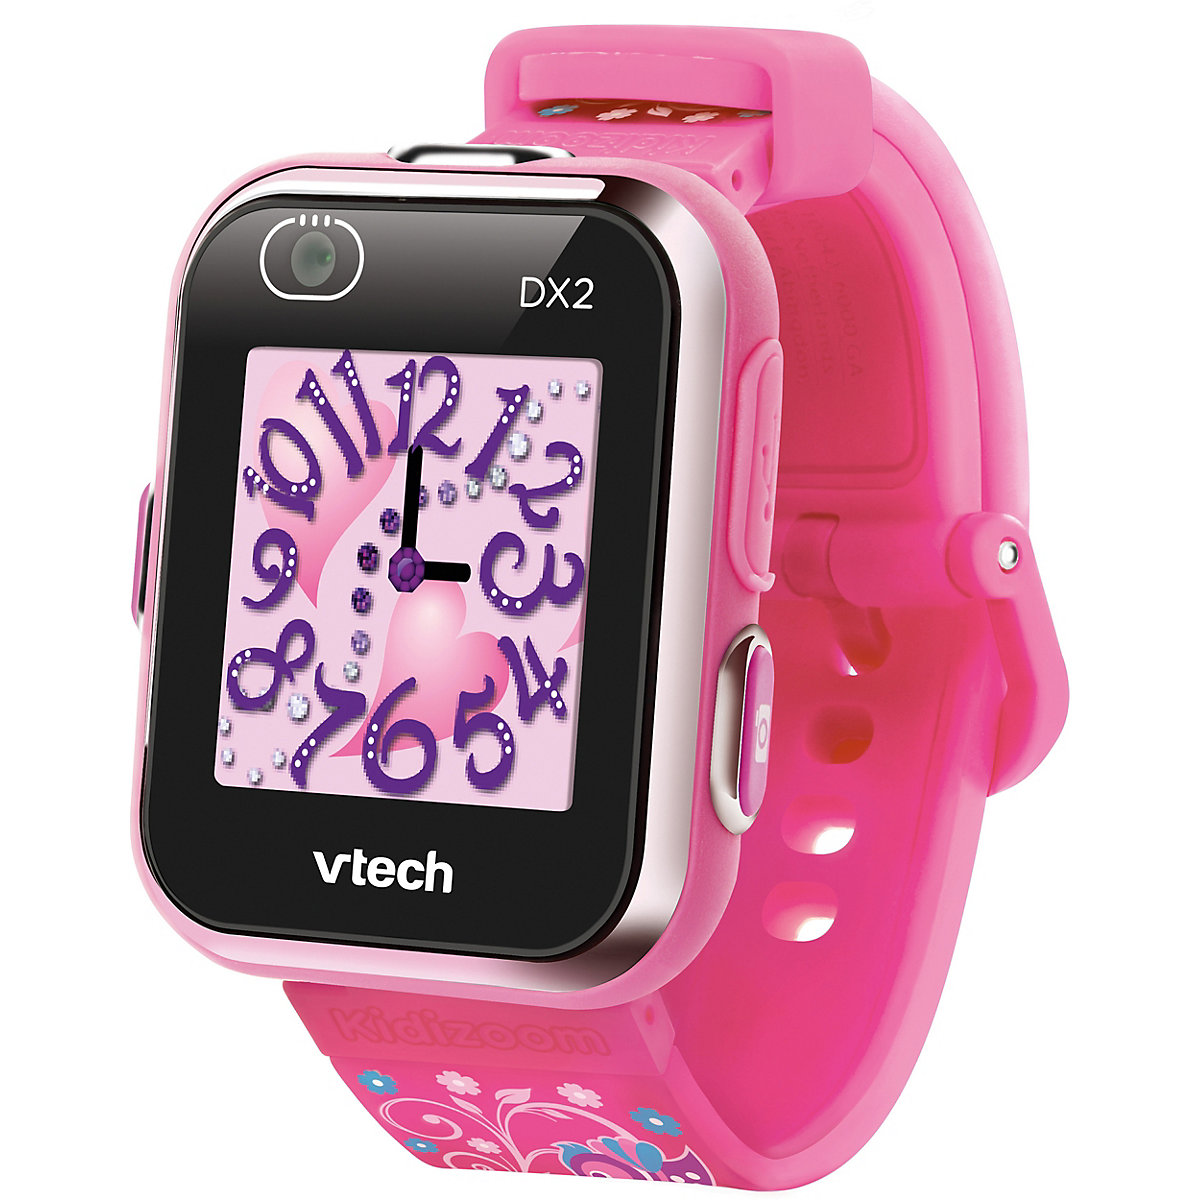 Kidizoom Smart Watch DX2 pink version with flowers